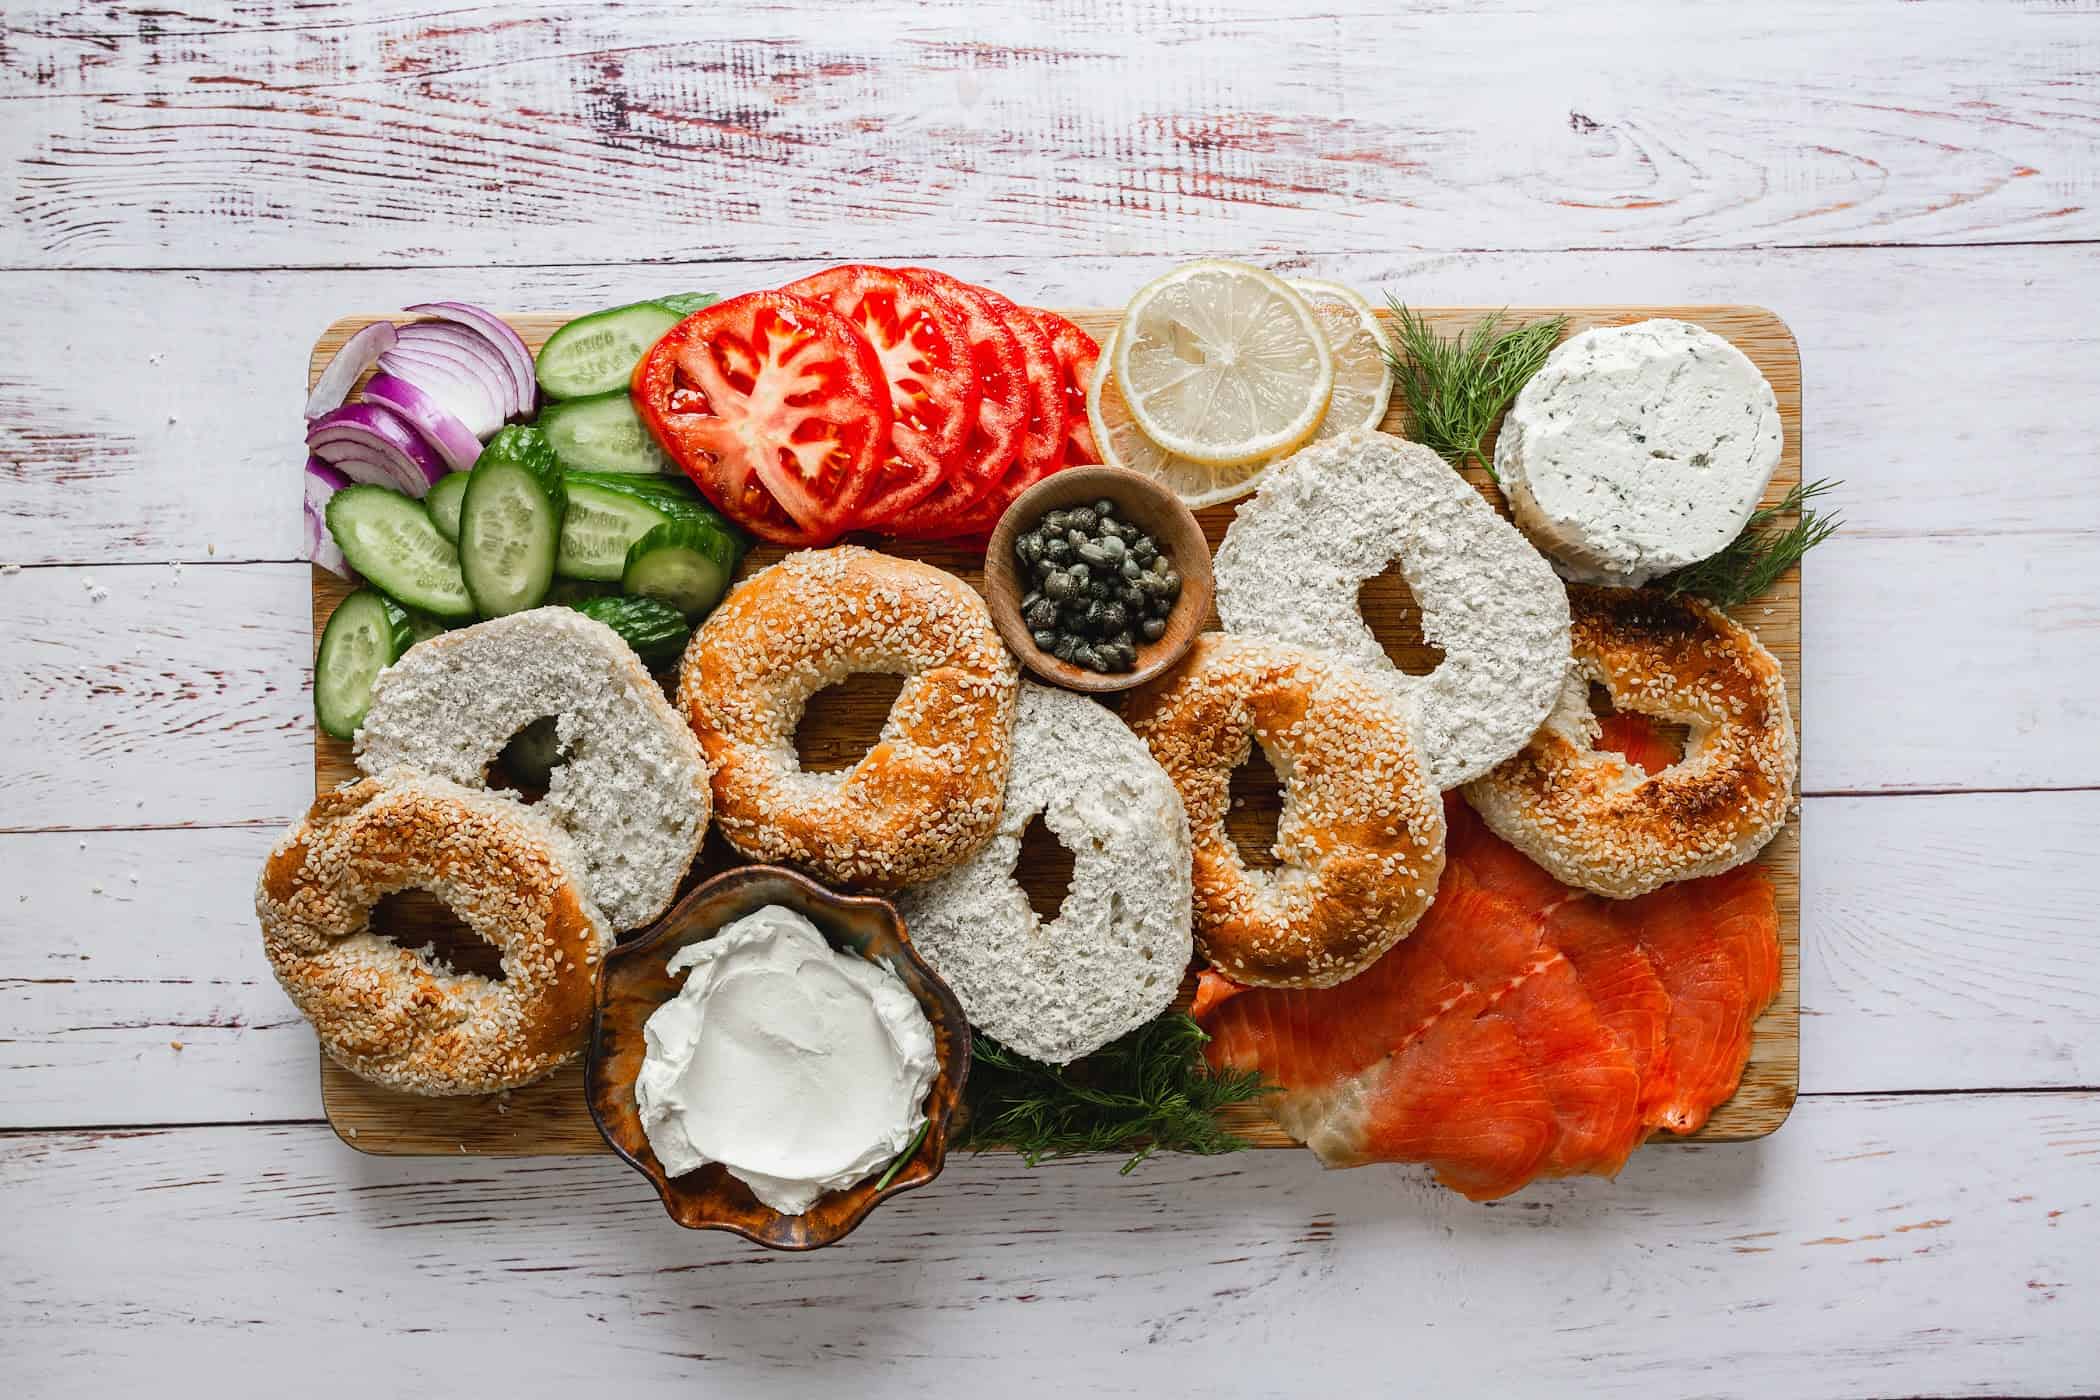 A lox and bagel board on a table.